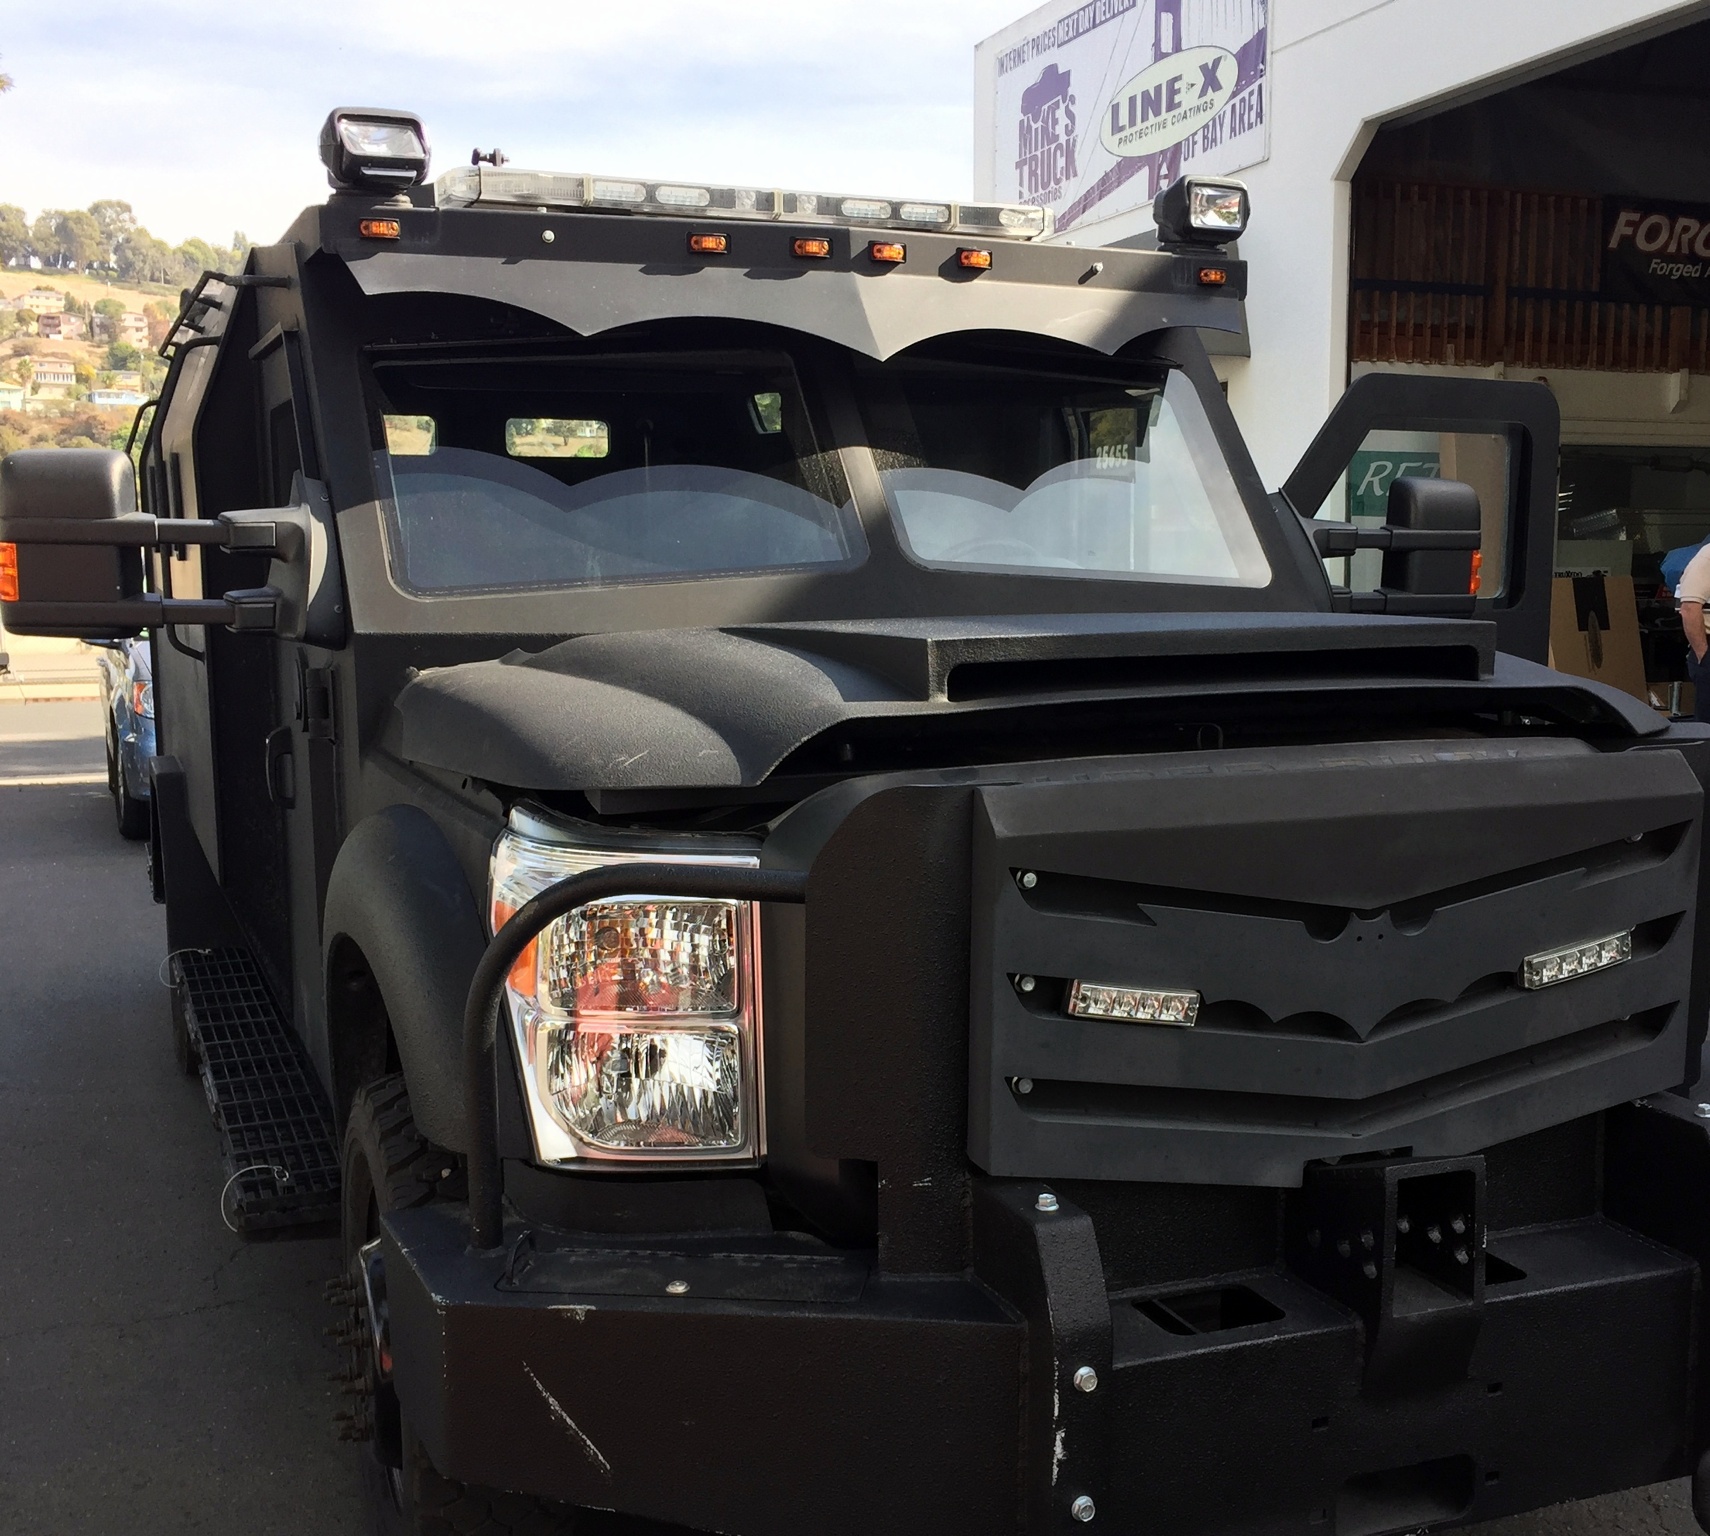 Mikes Truck & Line-X SWAT Truck